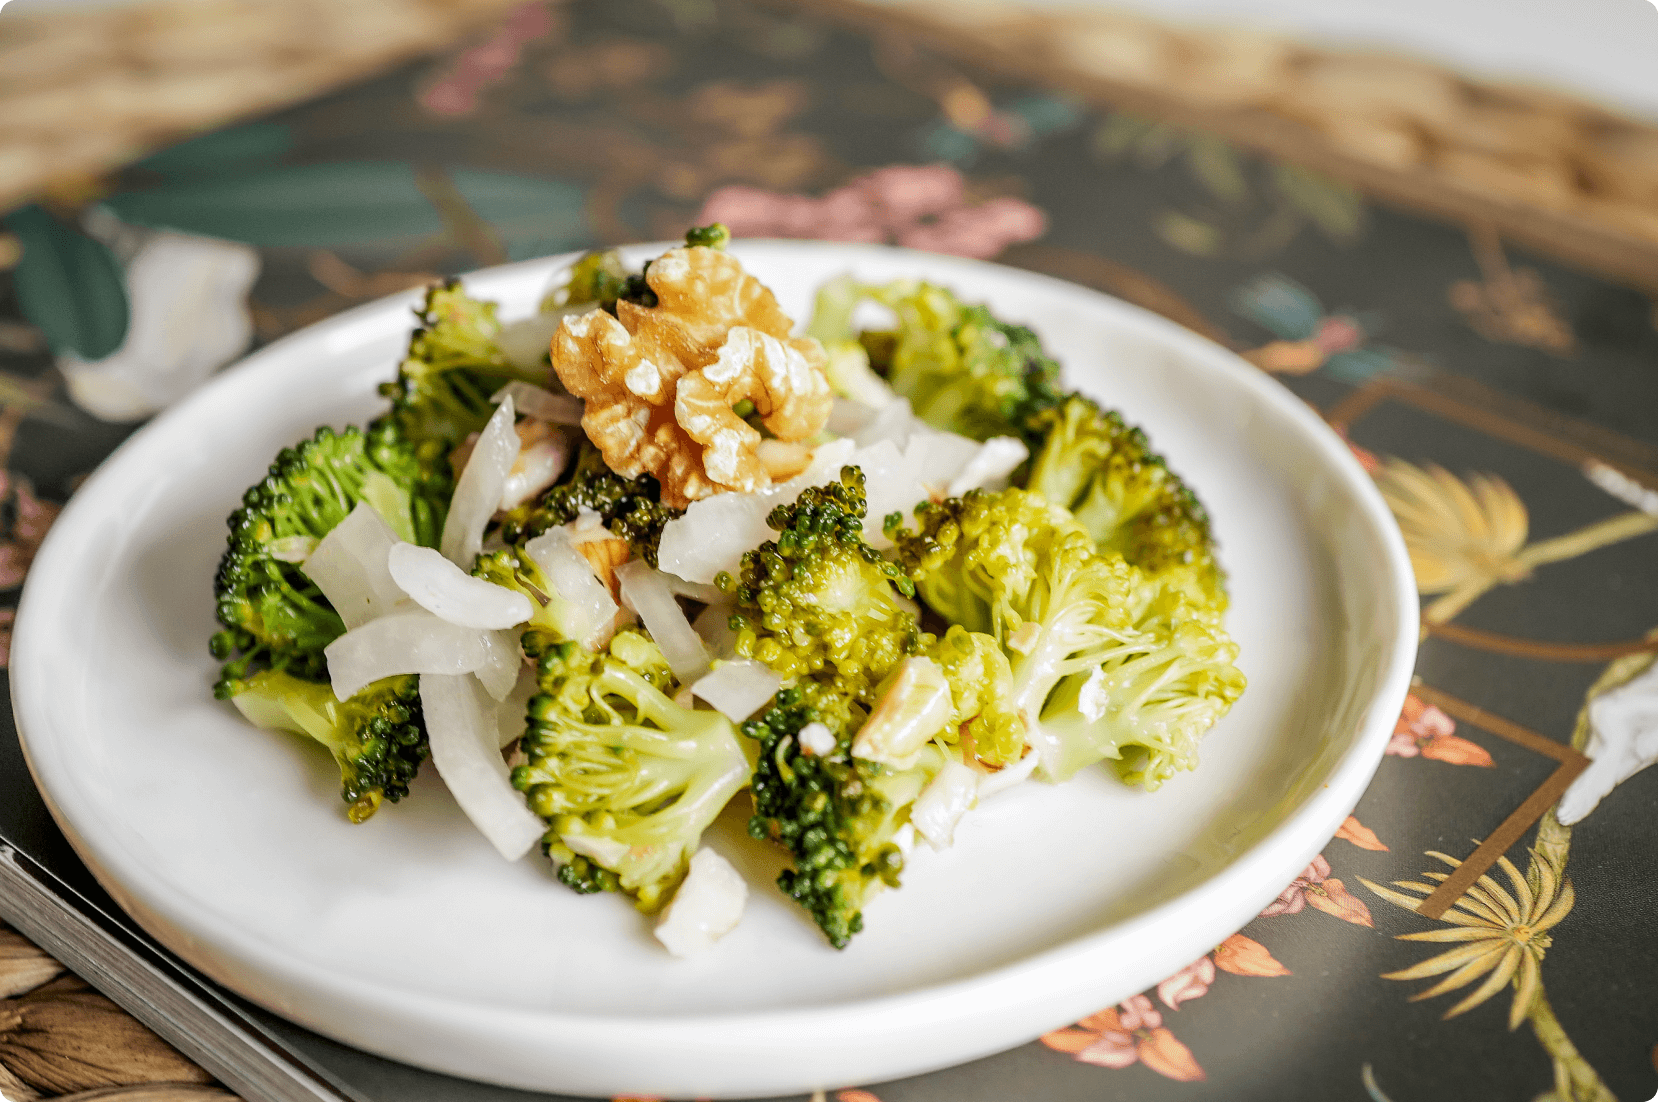 Broccoli, fruit and nuts